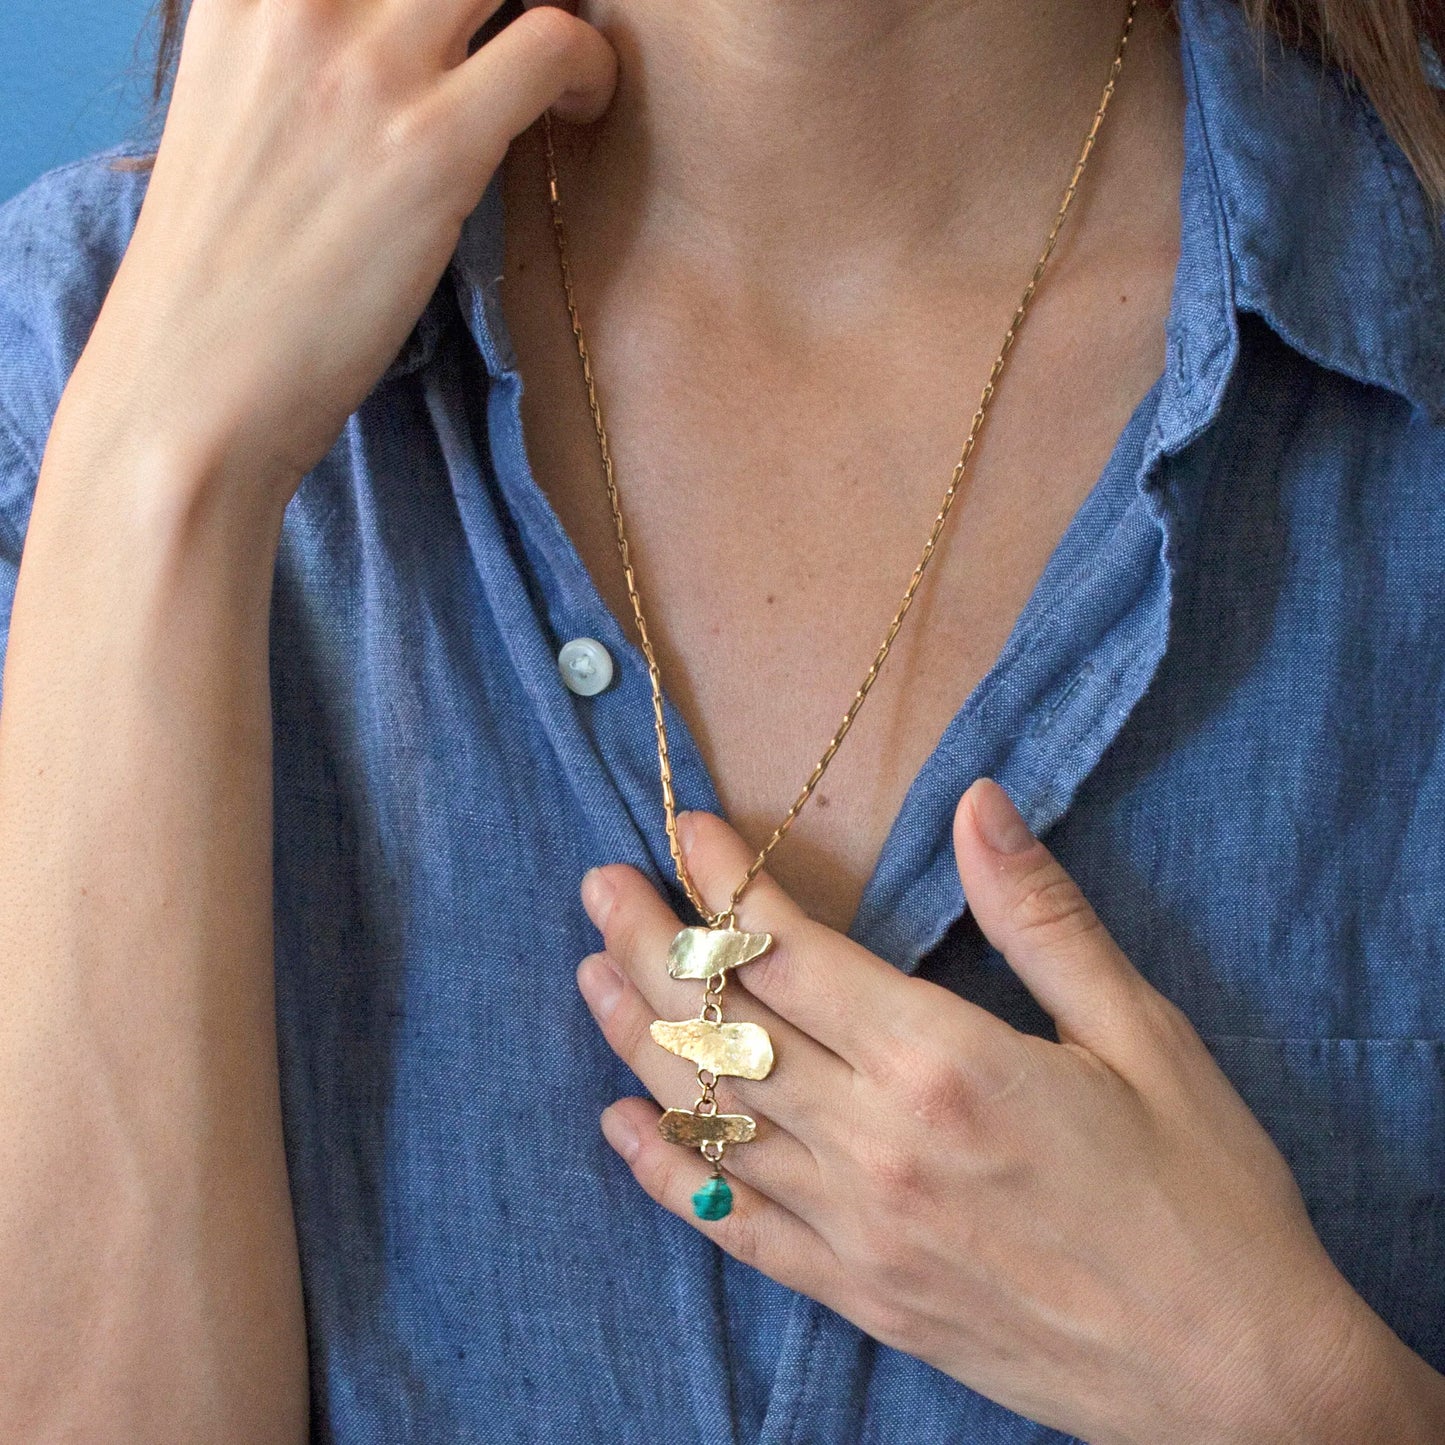 Turquoise + Brass 'Fern' Pendant Necklace